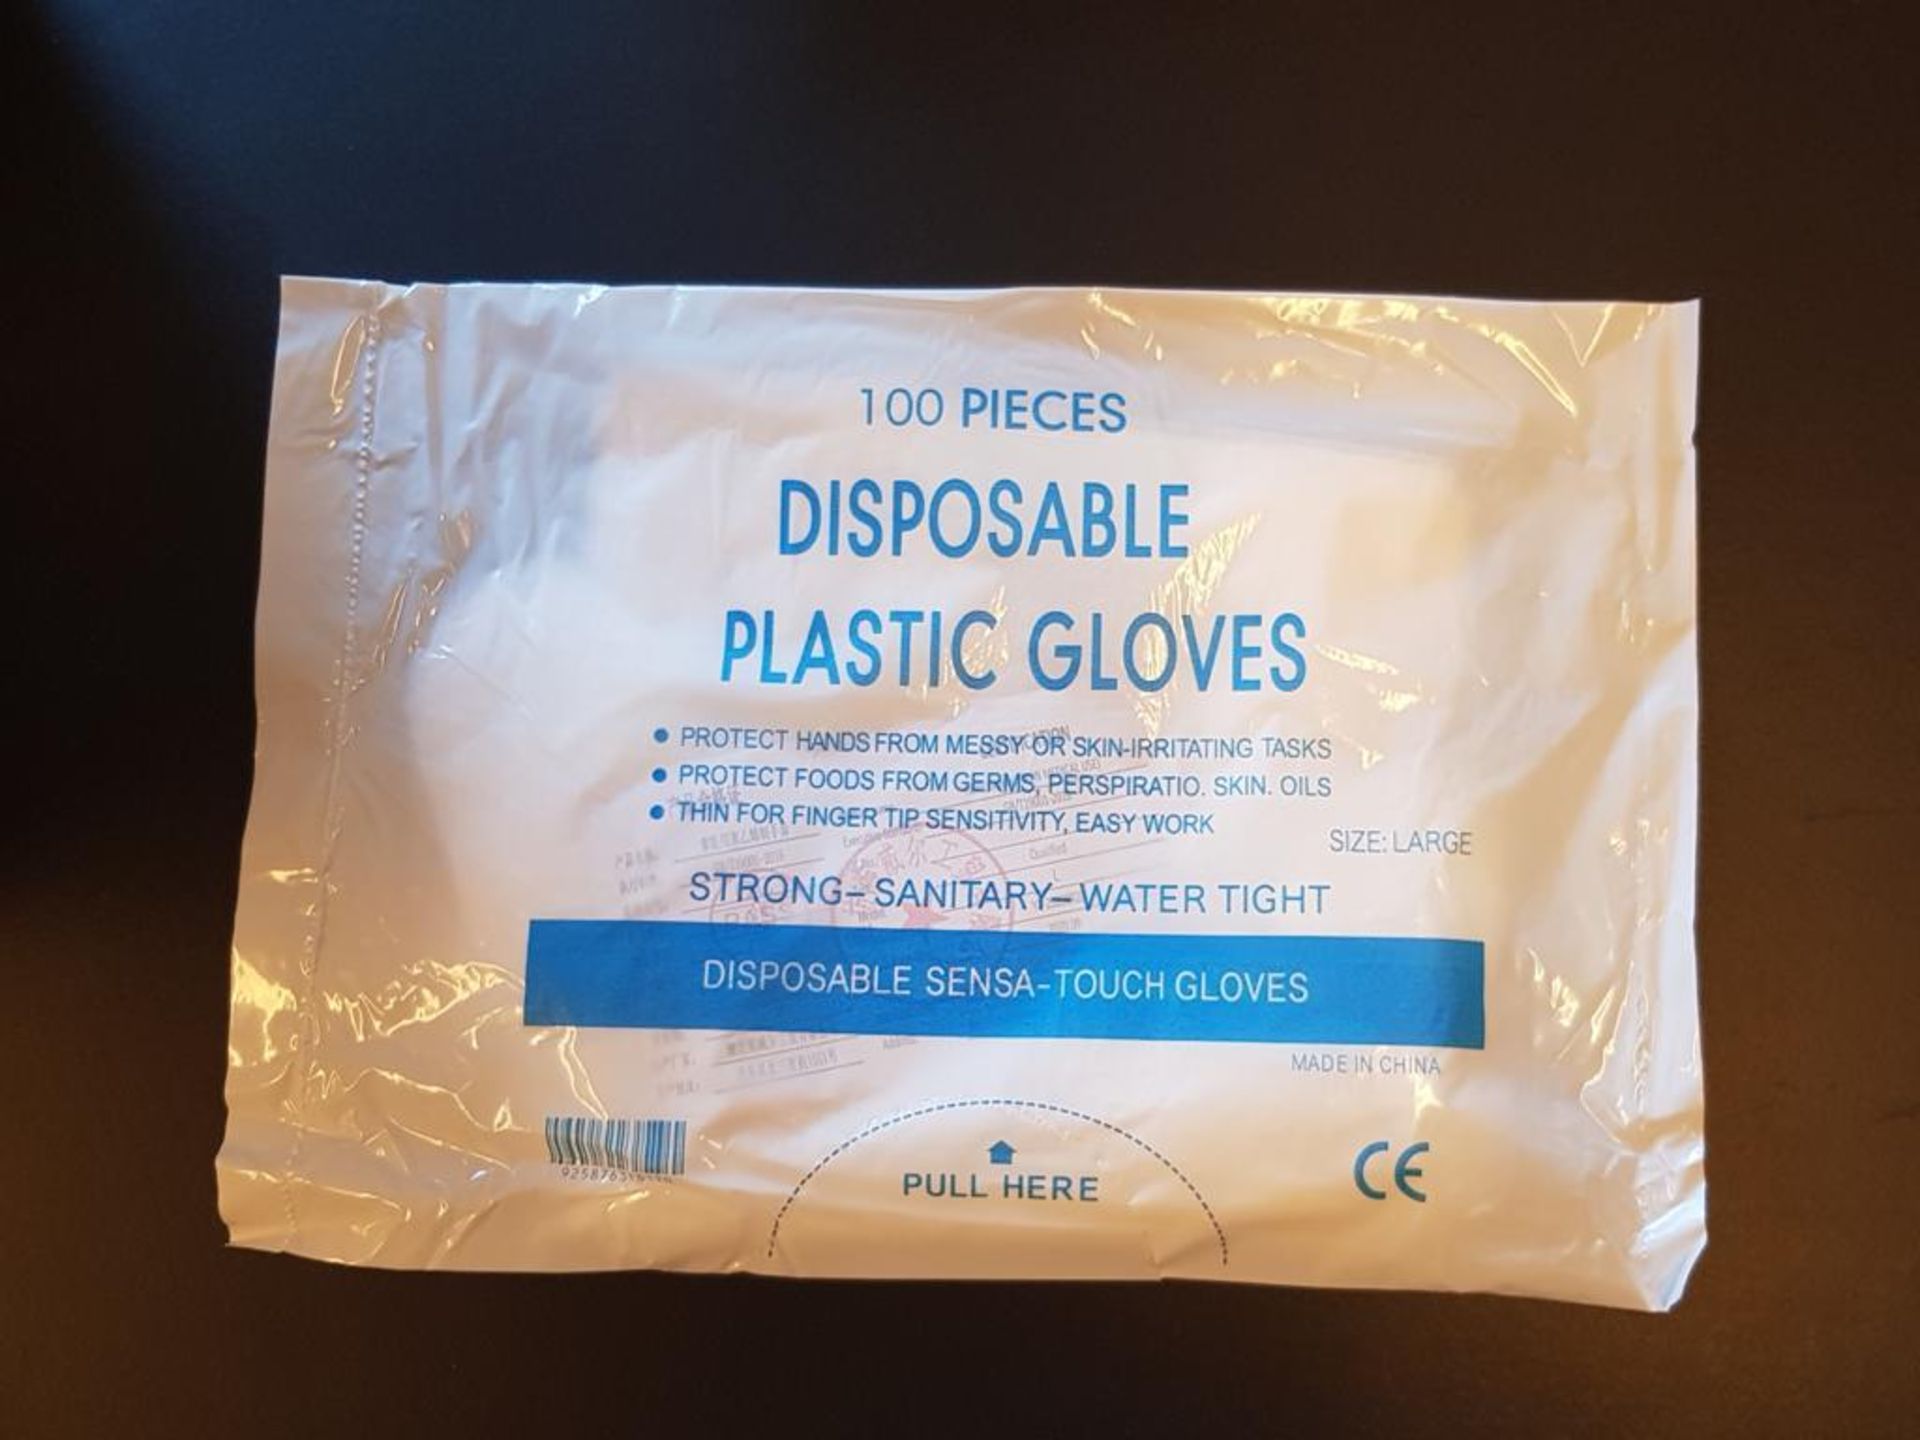 1 pallet of disposable plastic gloves - 77 boxes, 770,000 gloves